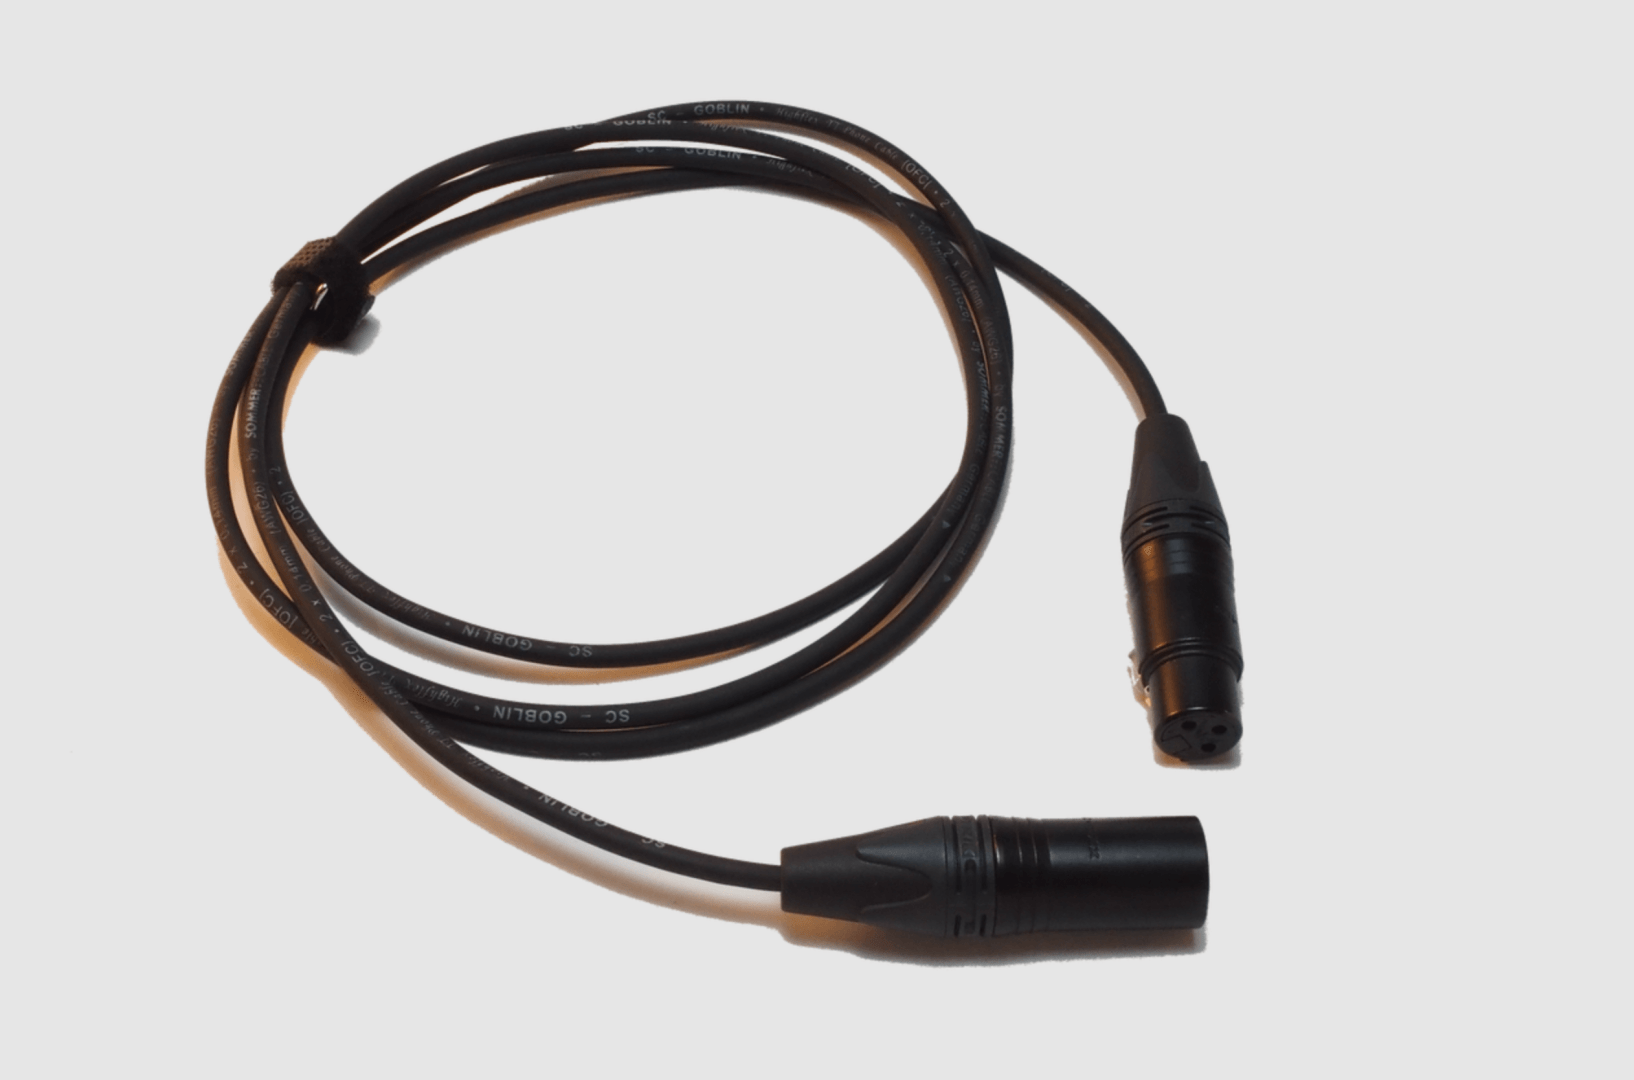 Beginner's Guide - How To Choose the Right XLR Cable?